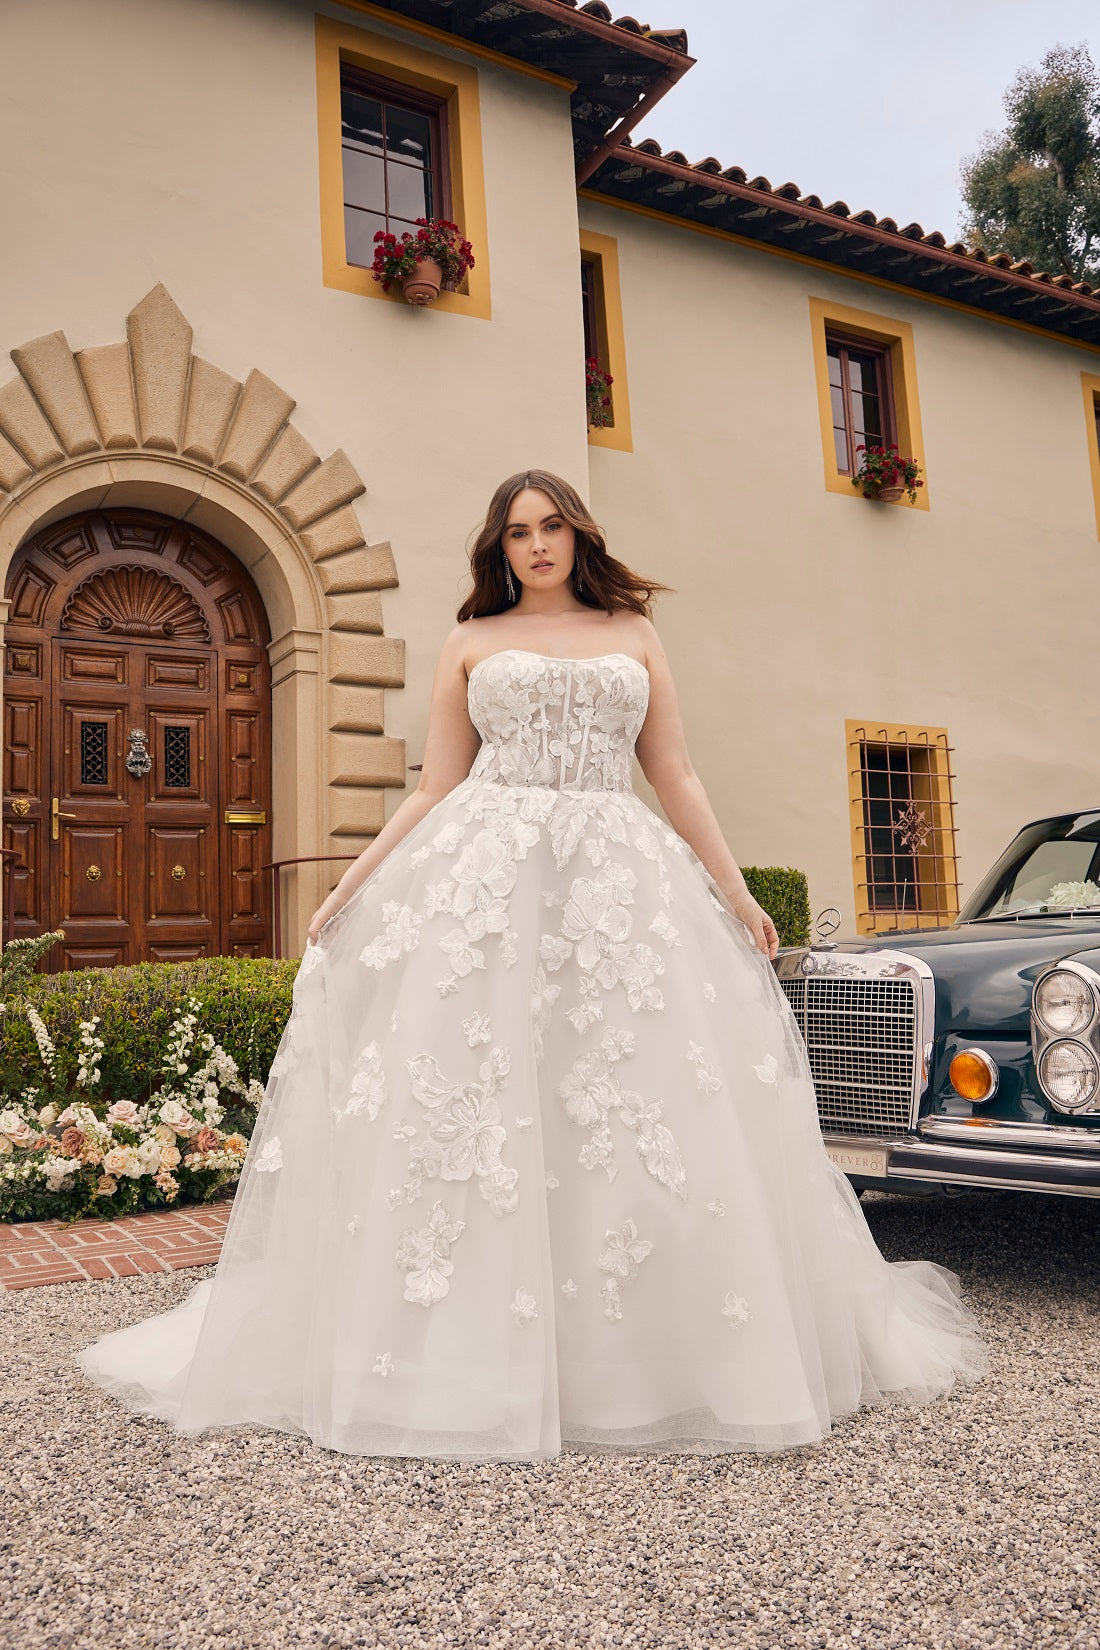 Casablanca Bridal 2540C Elloise A-Line Ballgown Strapless Sheer Floral Corset Sweetheart Neckline Open Back Train Wedding Gown. Prepare to be swept away by the ethereal beauty of Style 2540 Elloise, our exquisite A-line wedding dress. Plus sized